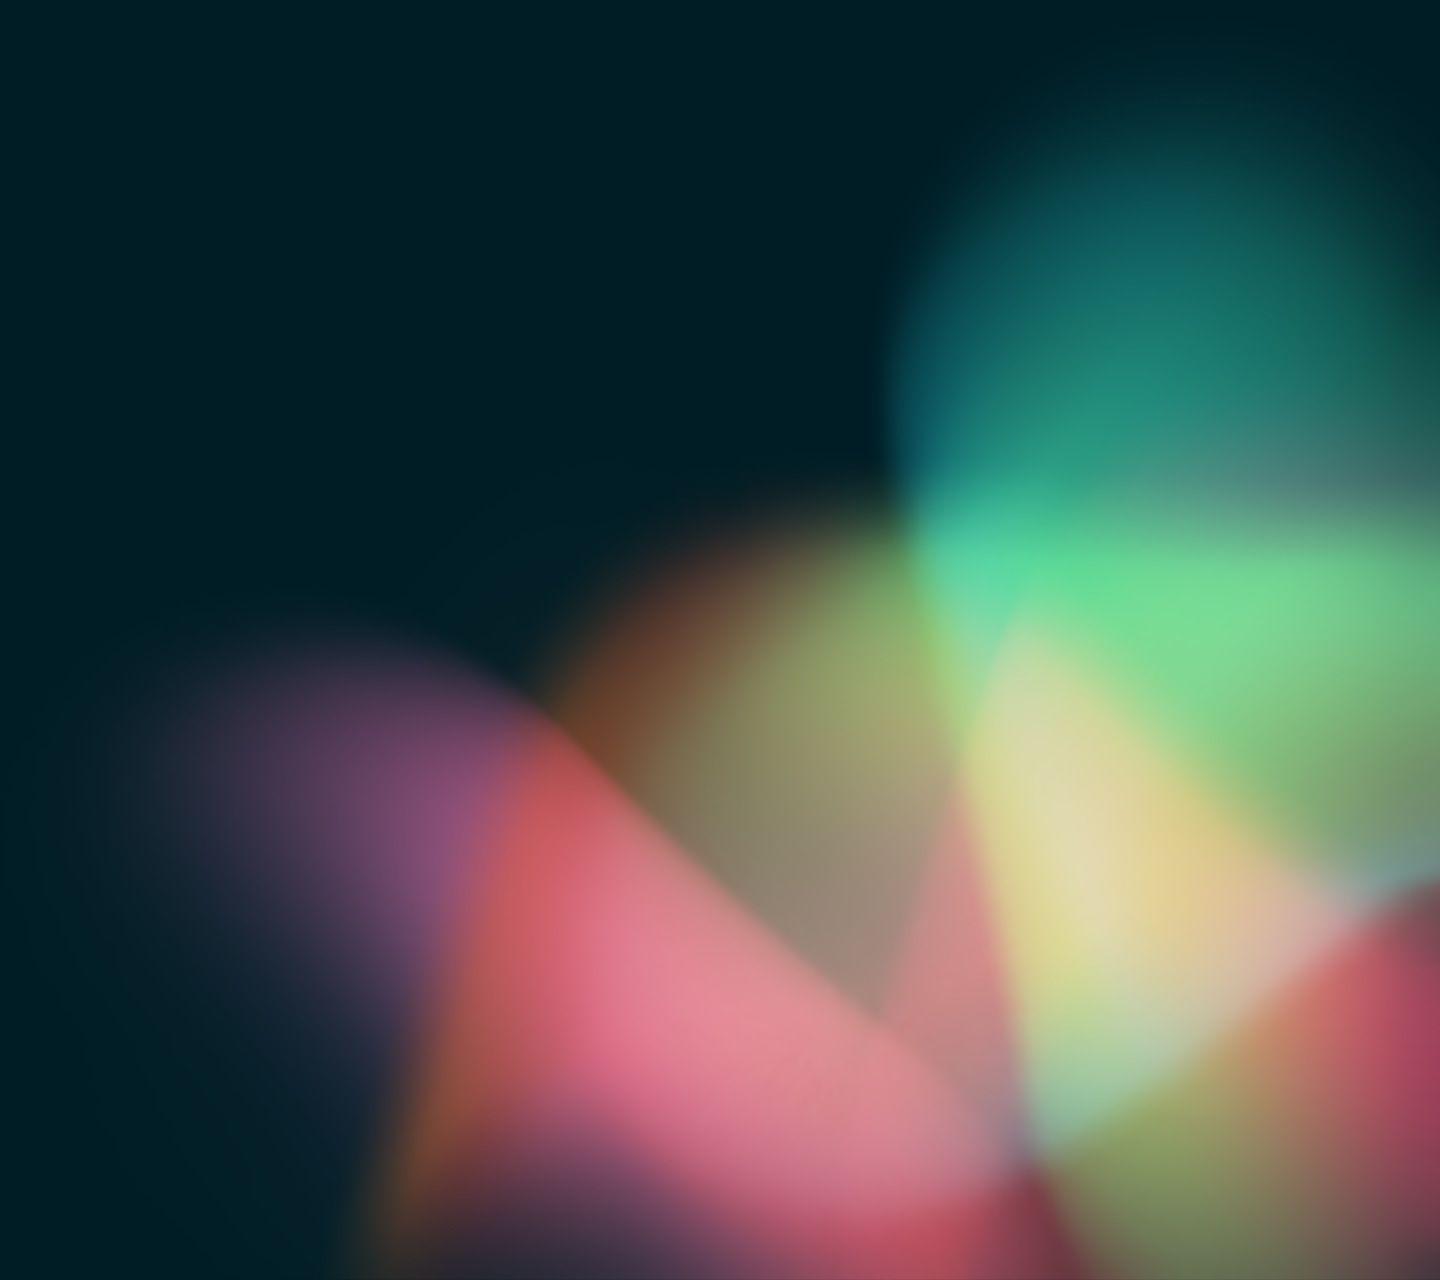 Android 4.1 Jelly Bean Stock Wallpaper 01 - [1440 x 1280]